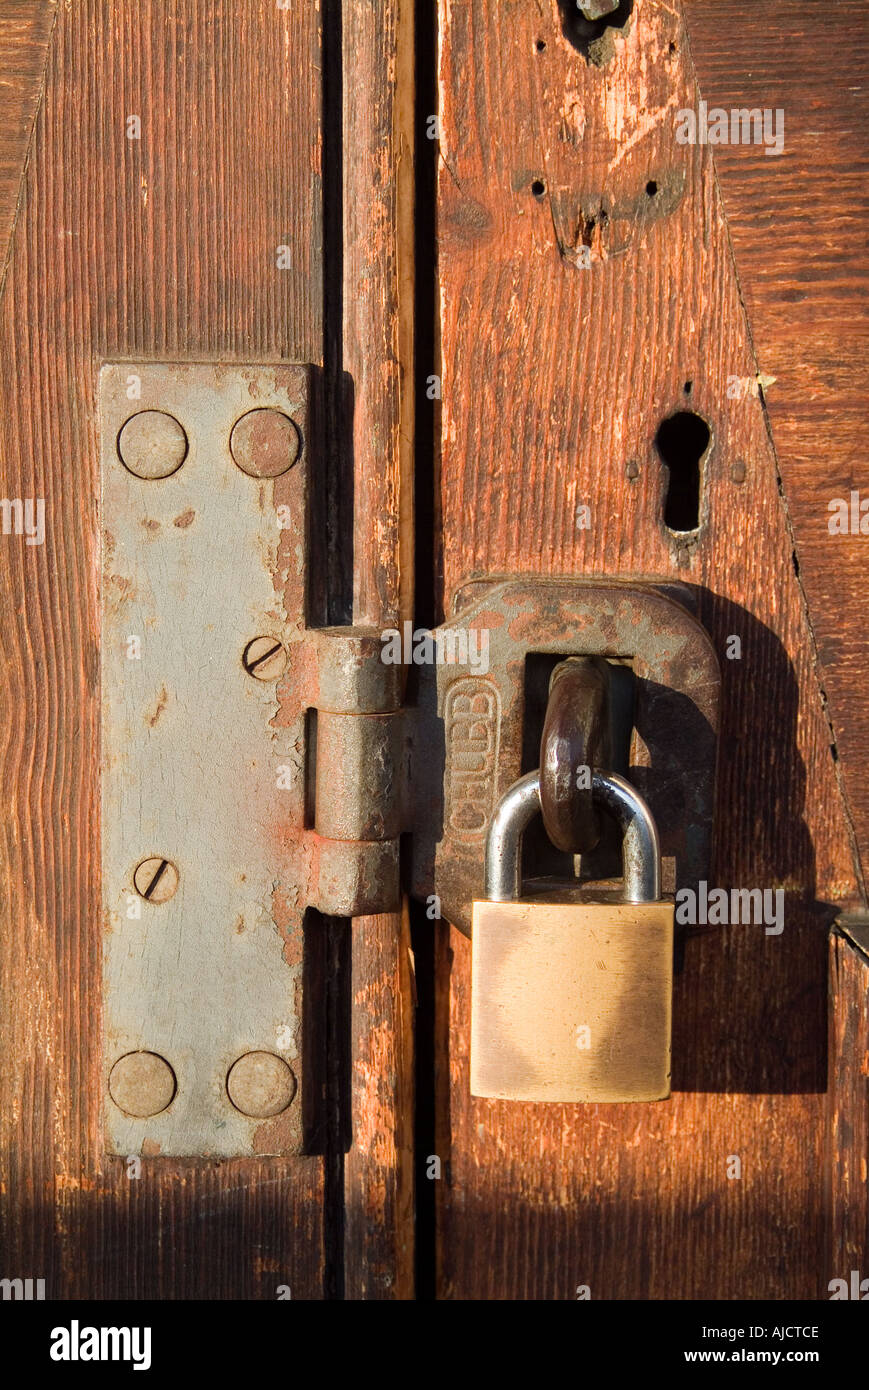 Old wooden double door fastened by padlock and hasp Stock Photo